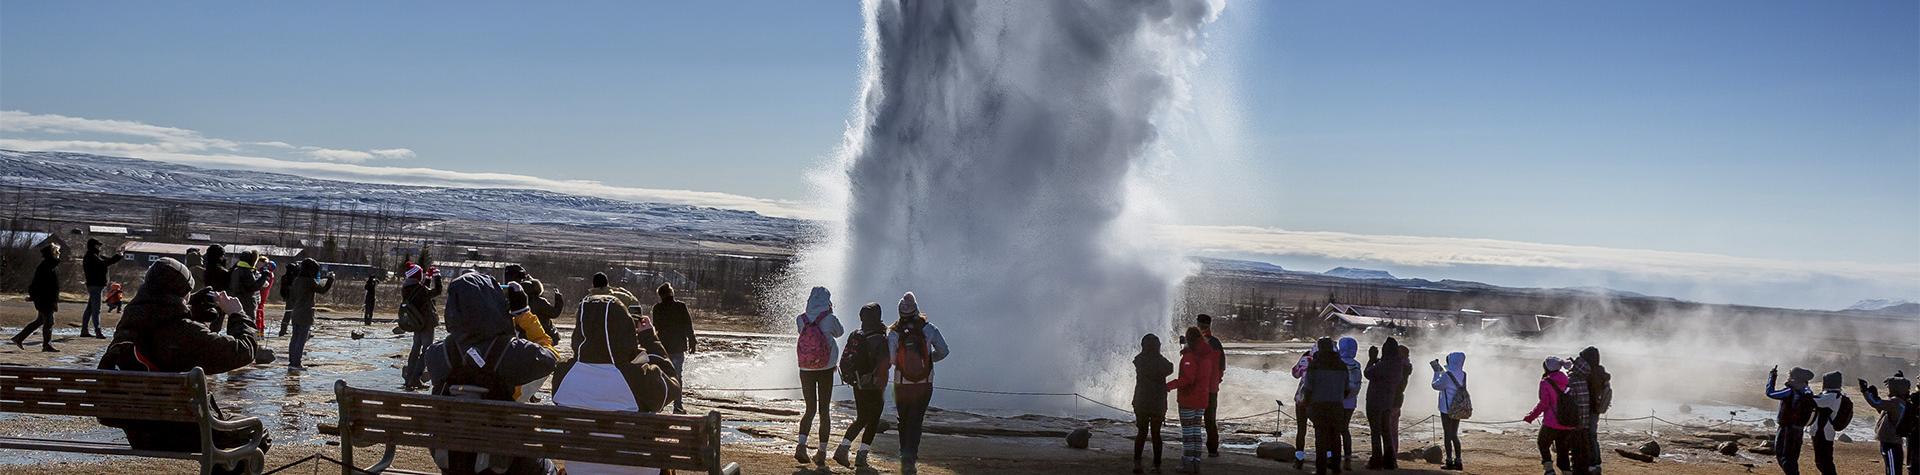 Iceland guided tours: Strokkur erupting, geothermal area Haukadalur Valley, South Iceland